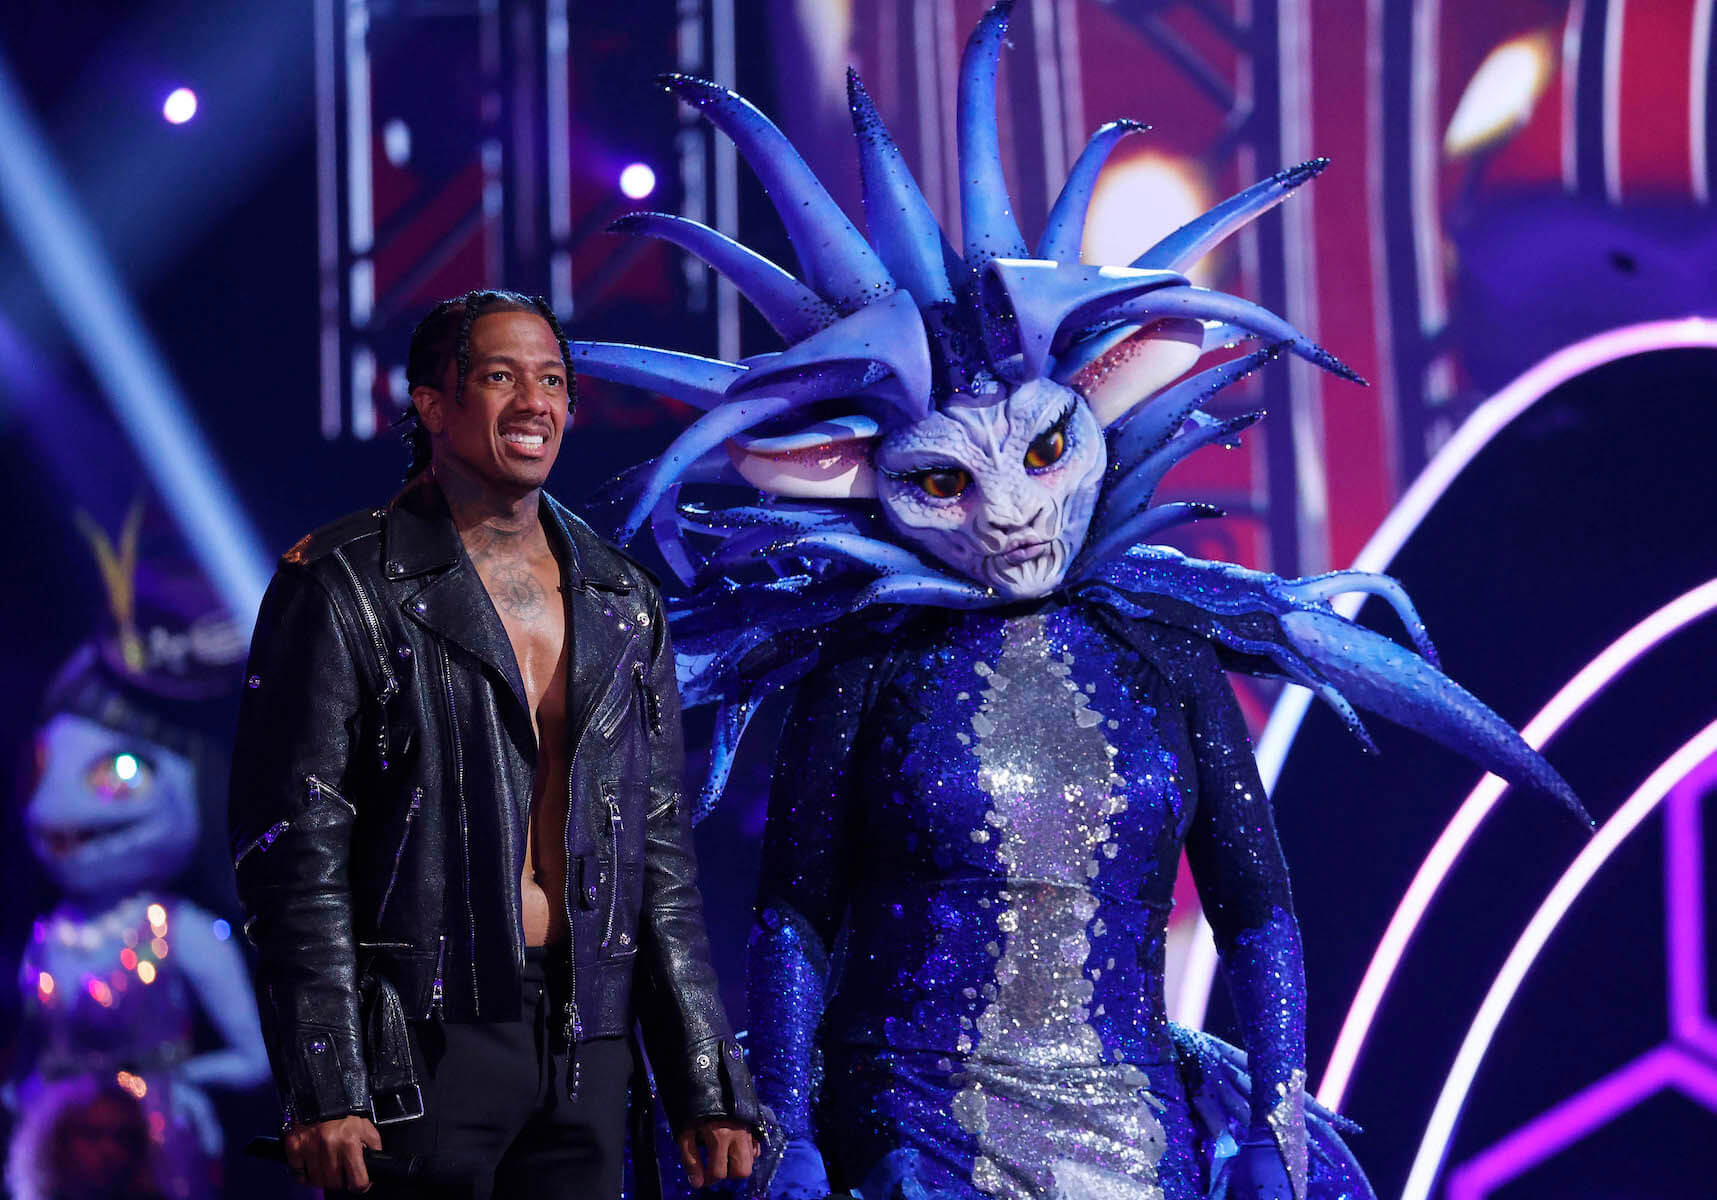 'The Masked Singer' Season 10 singer Sea Queen standing next to host Nick Cannon